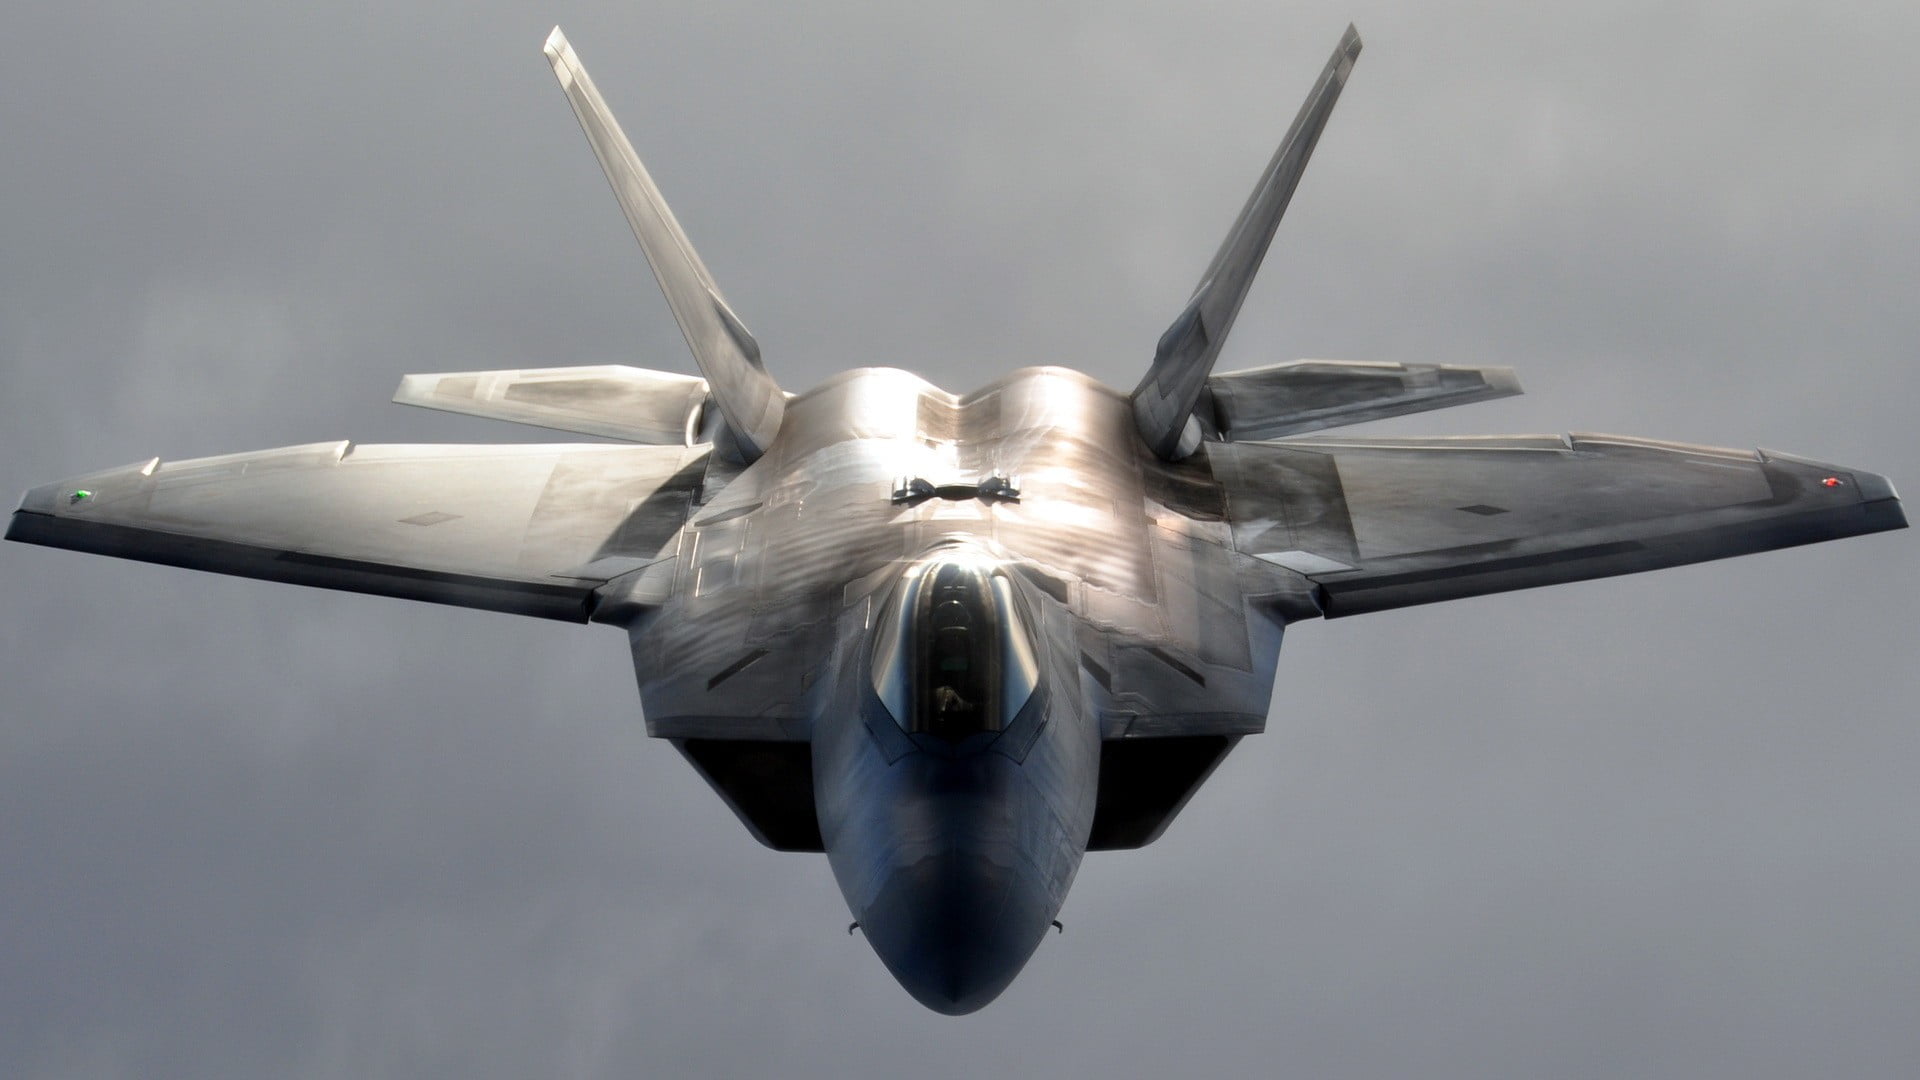 gray fighter plane, F-22 Raptor, military aircraft, vehicle, aircraft